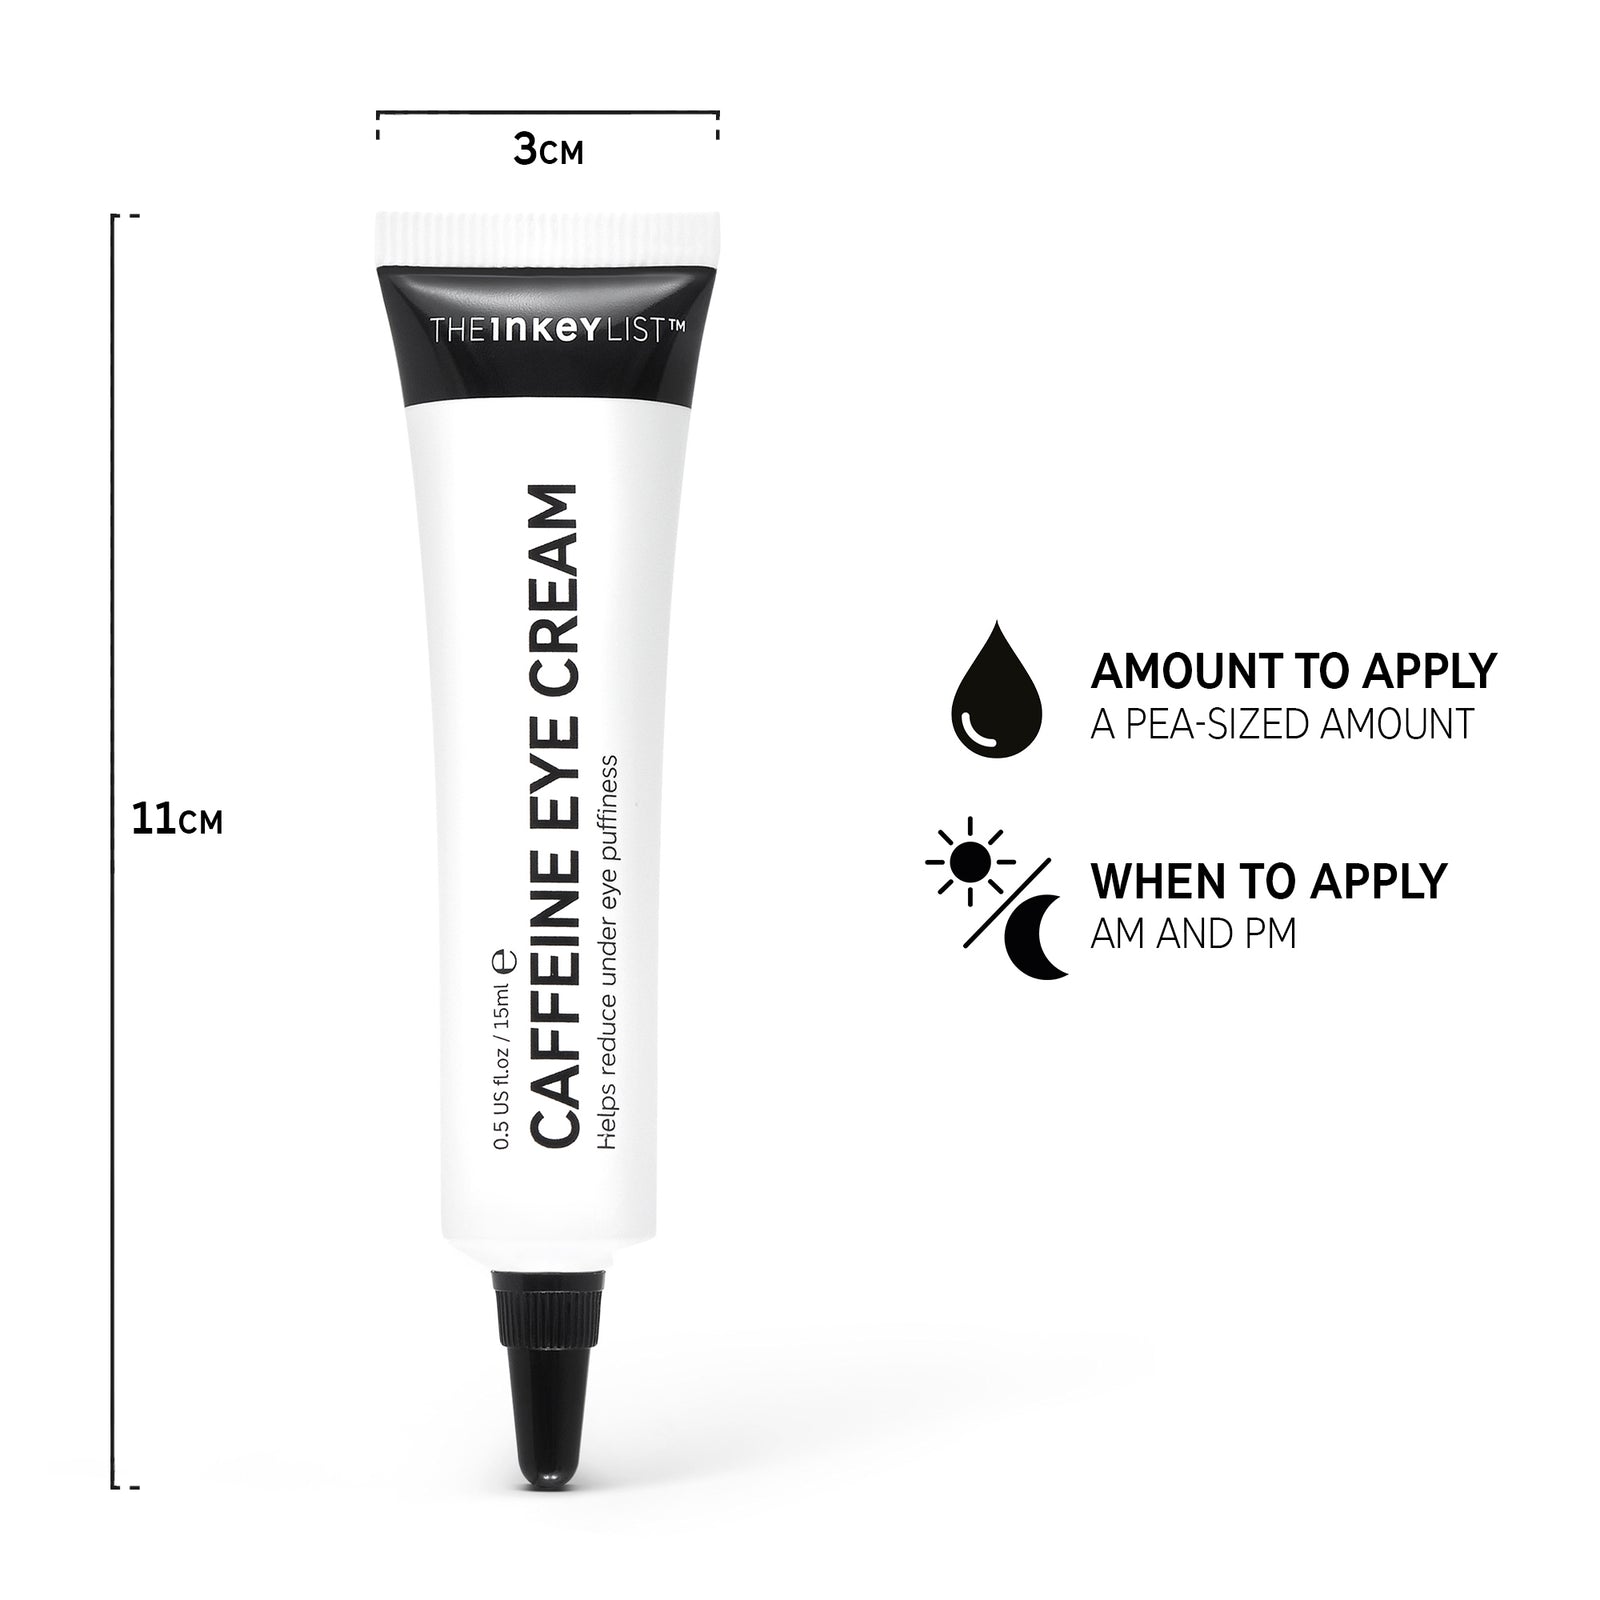 Caffeine Eye Cream dimensions and  text explaining amount to apply (a pea sized amount) and when to apply (AM and PM)